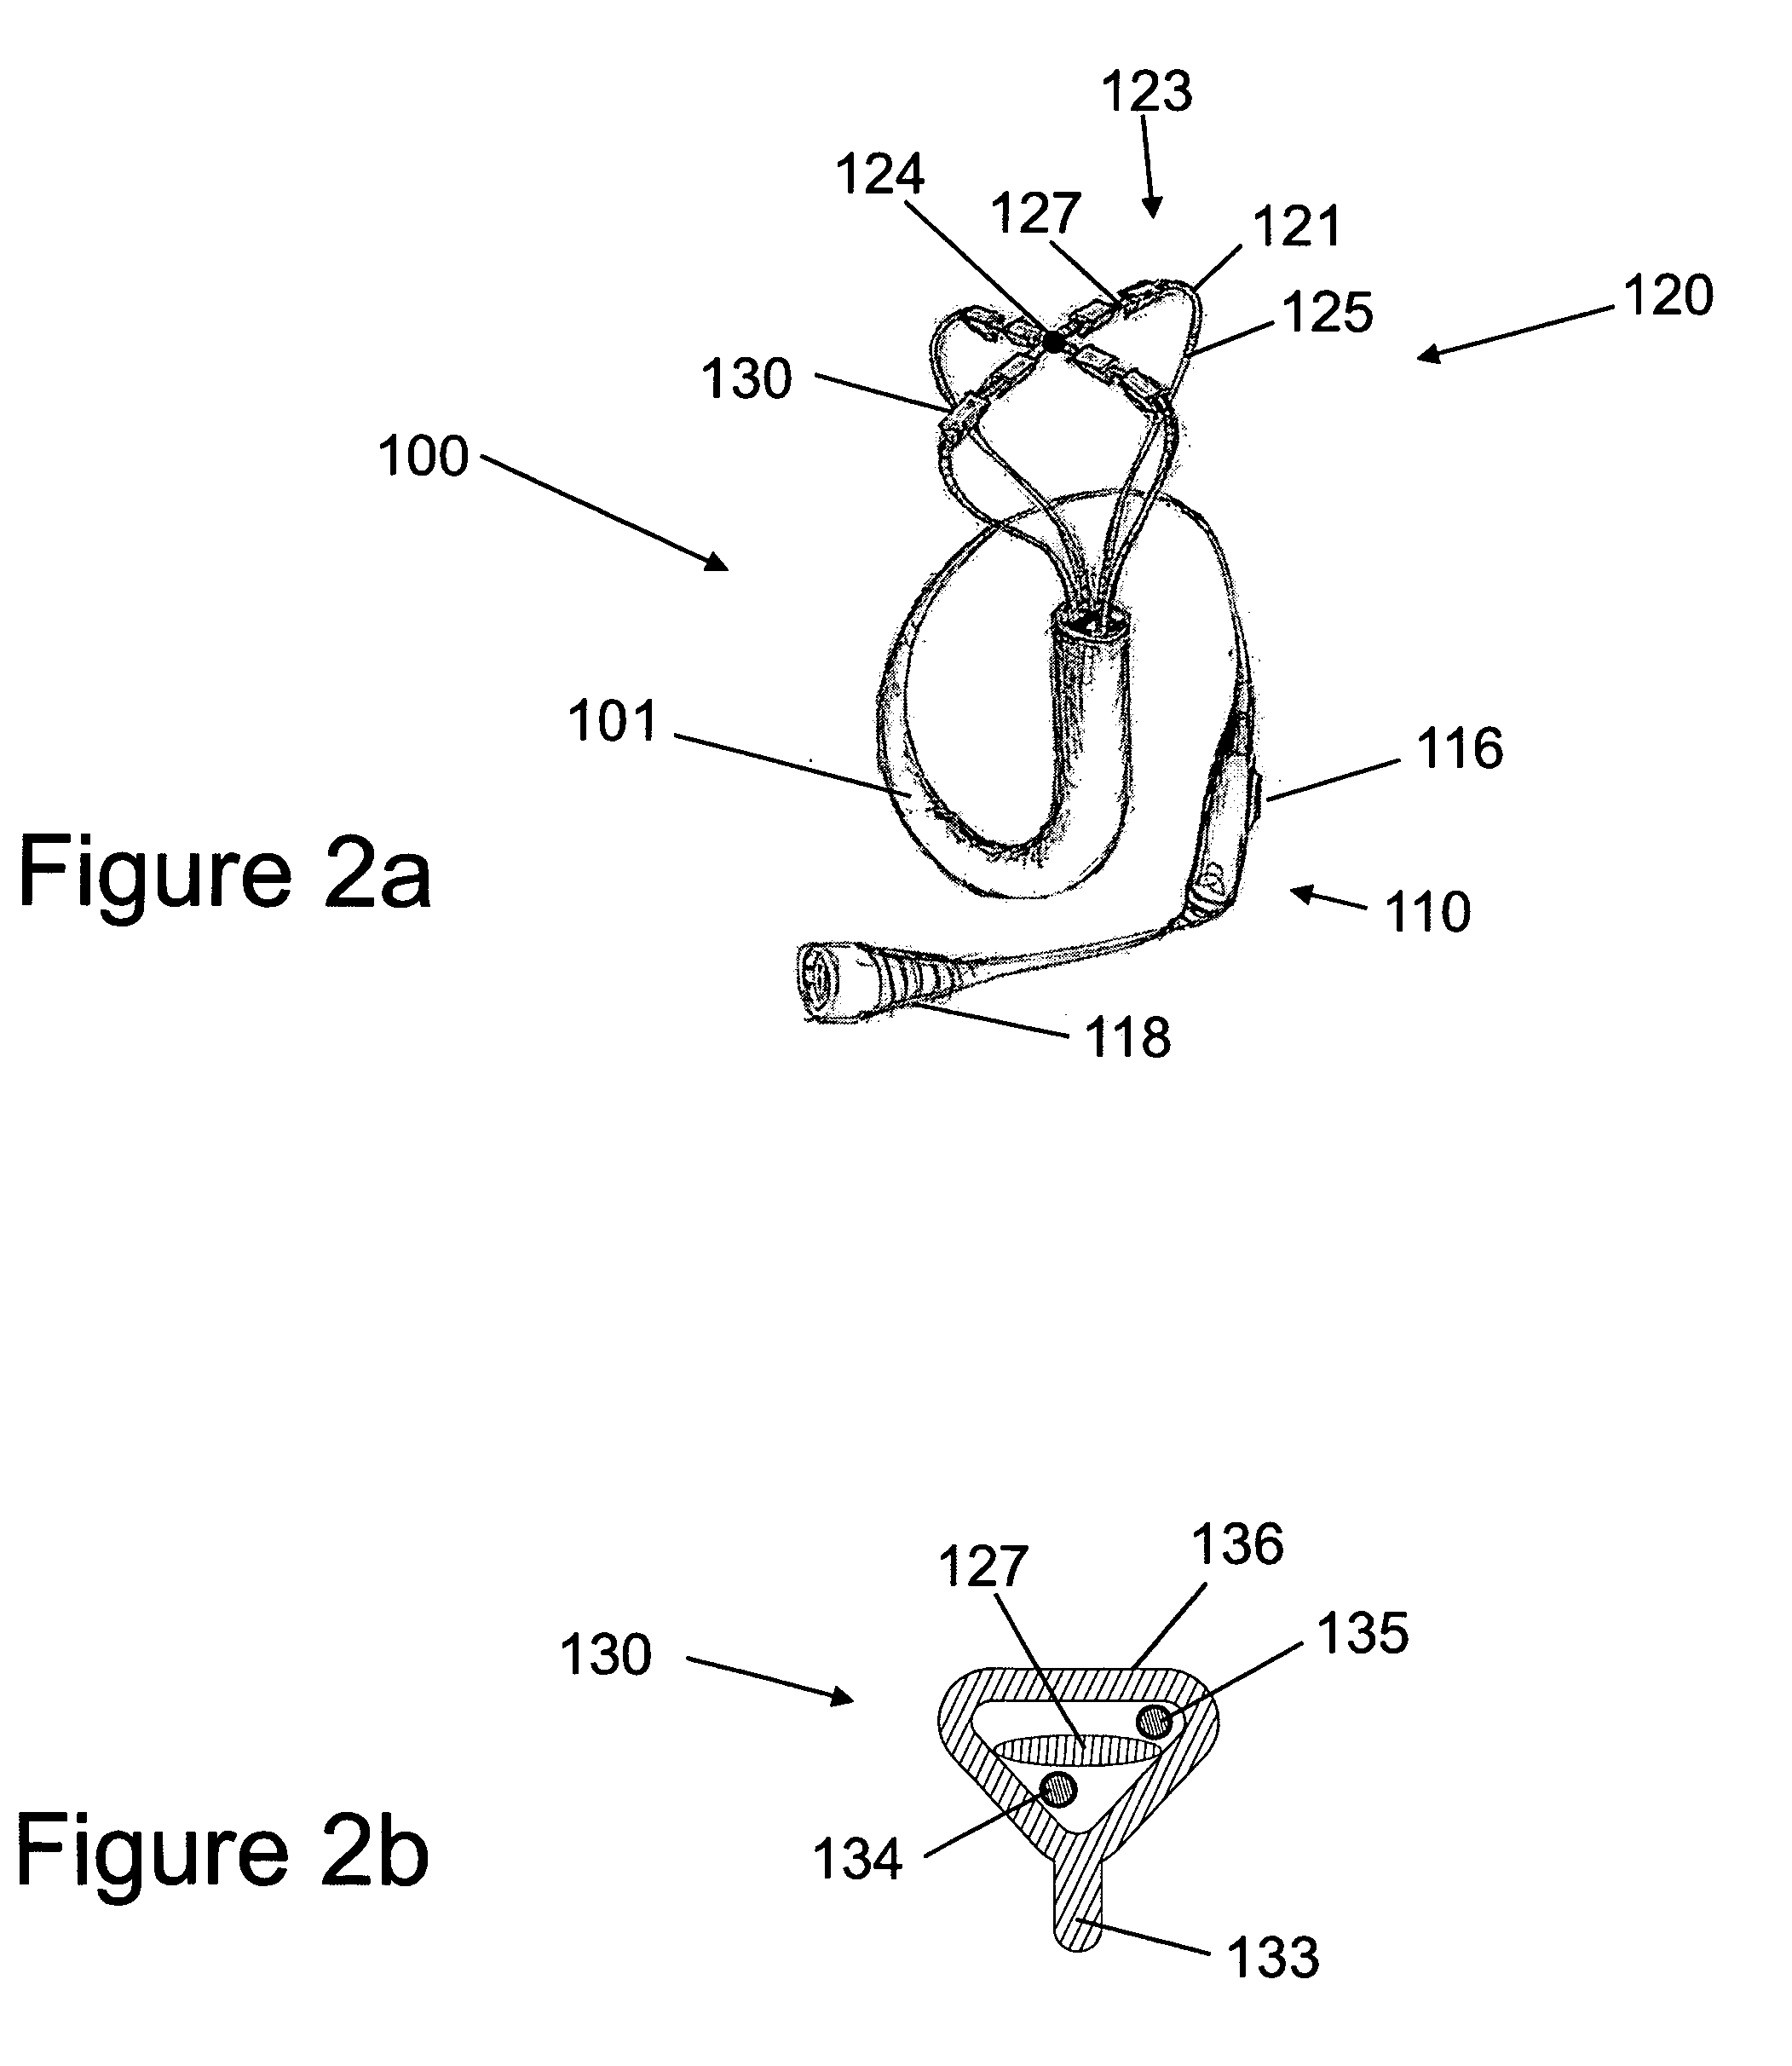 Low power tissue ablation system